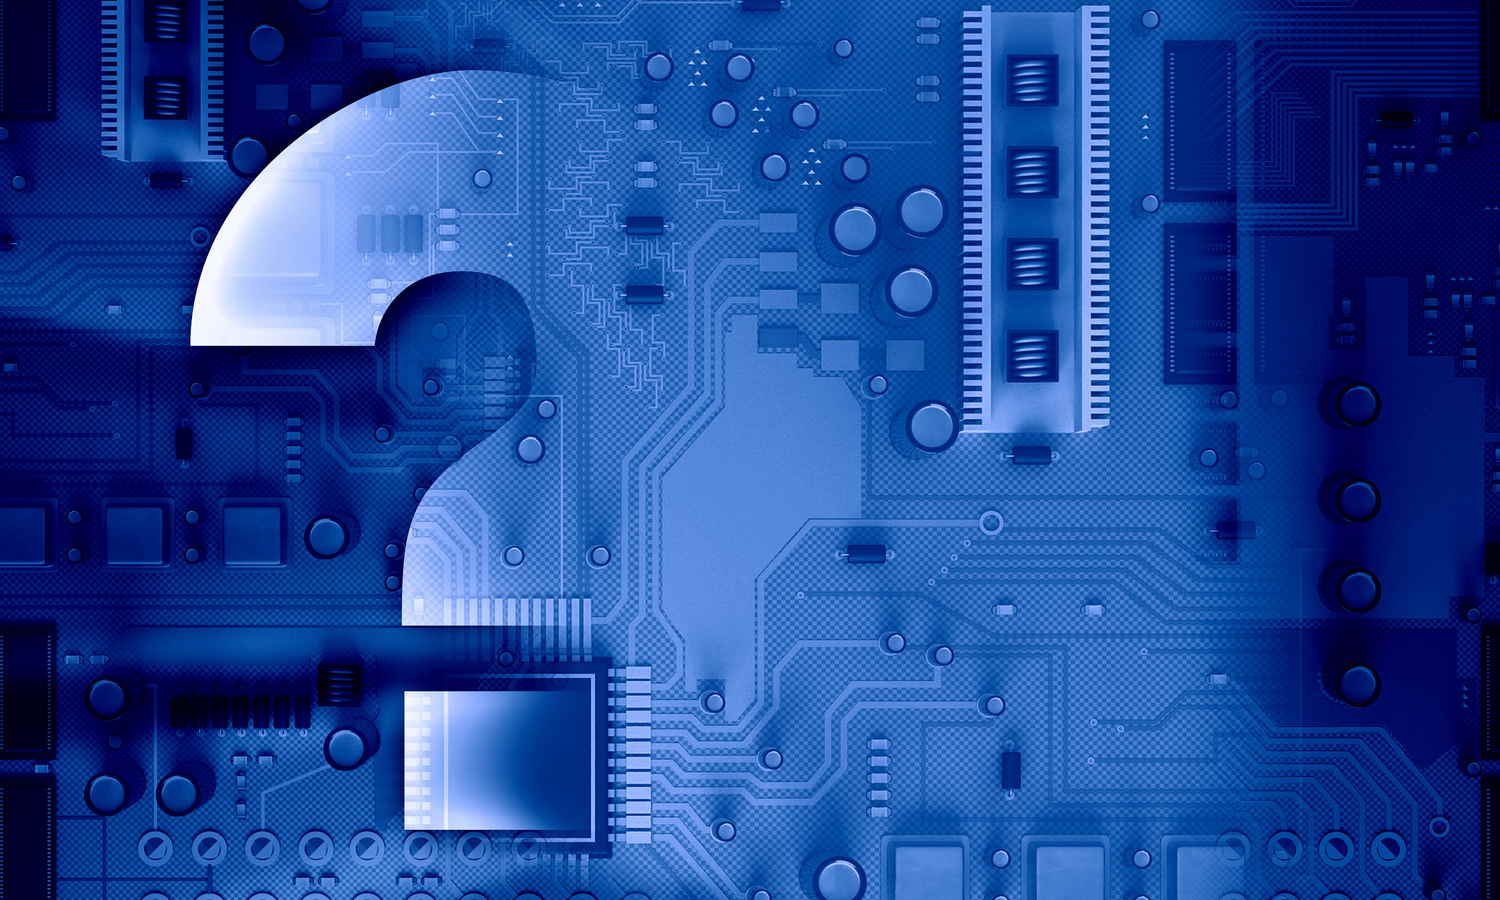 5 Questions You Should Ask When Looking for a Data Storage Provider